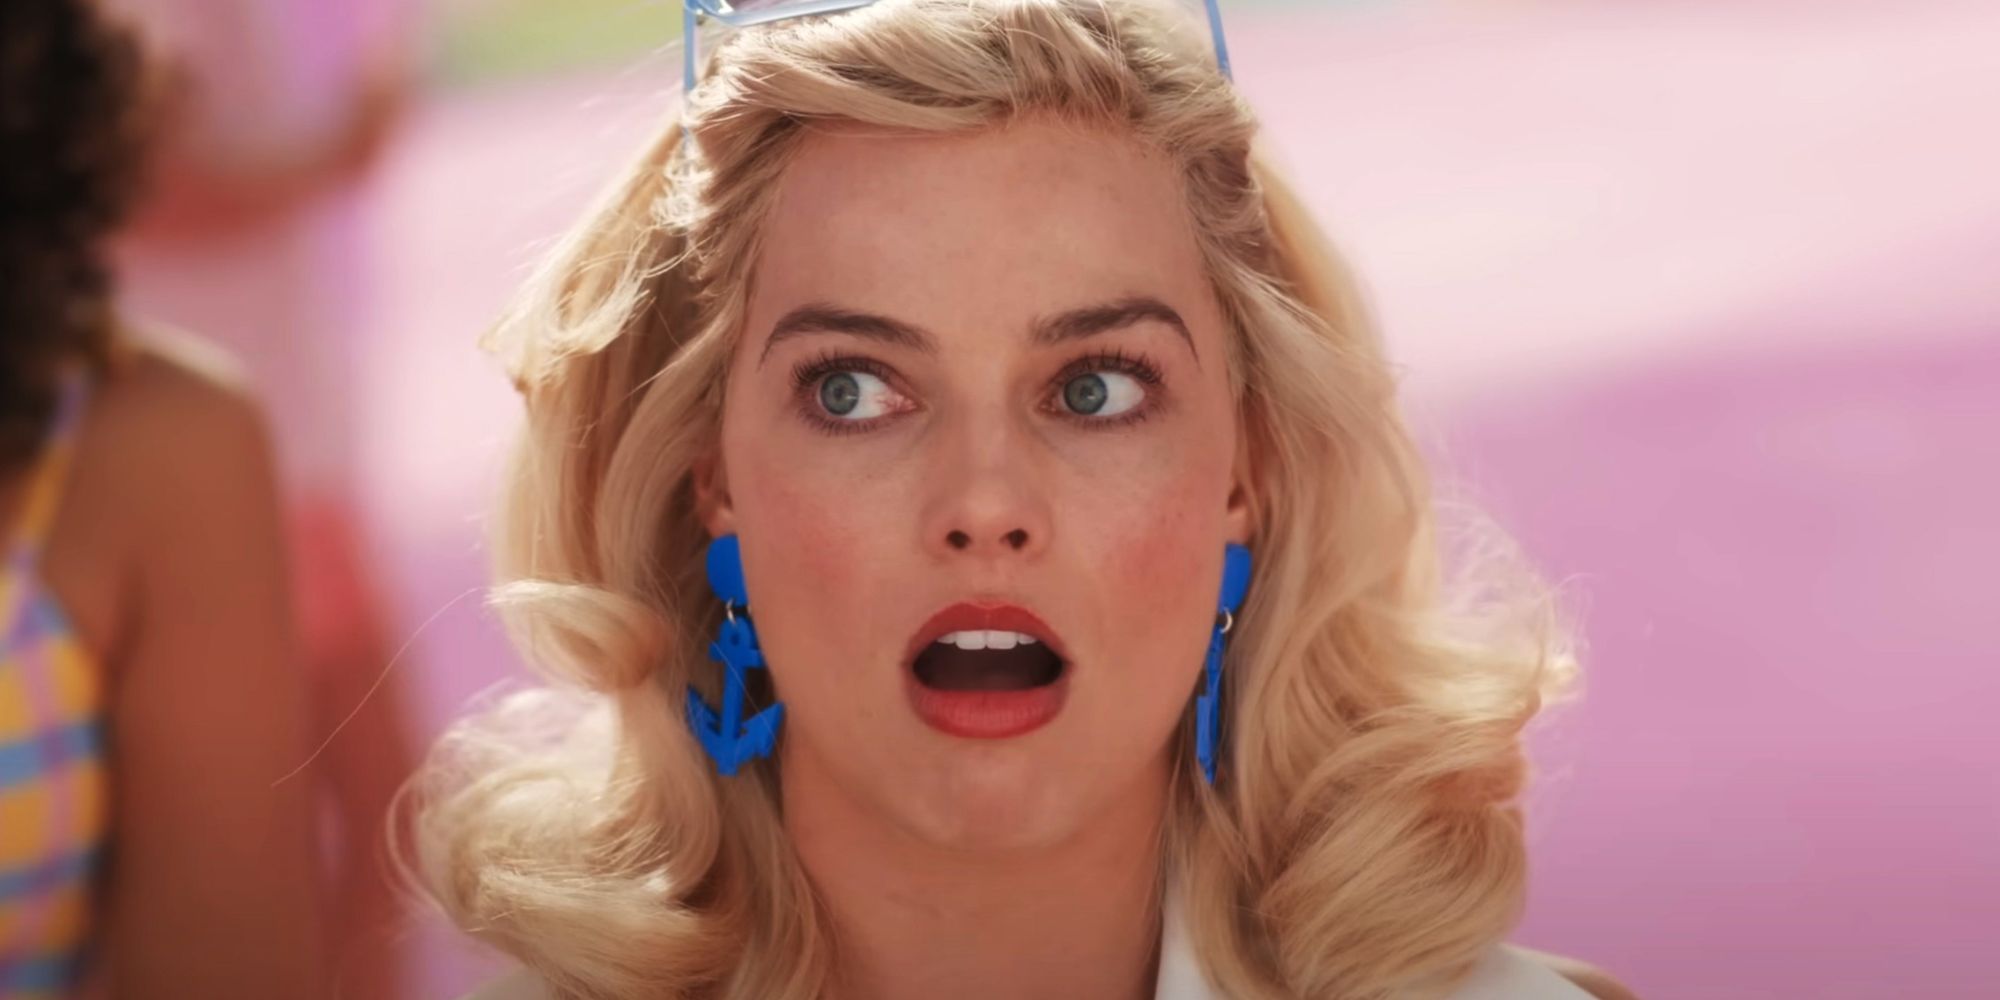 margot-robbie-will-produce-monopoly-movie-for-lionsgate-&-hasbro